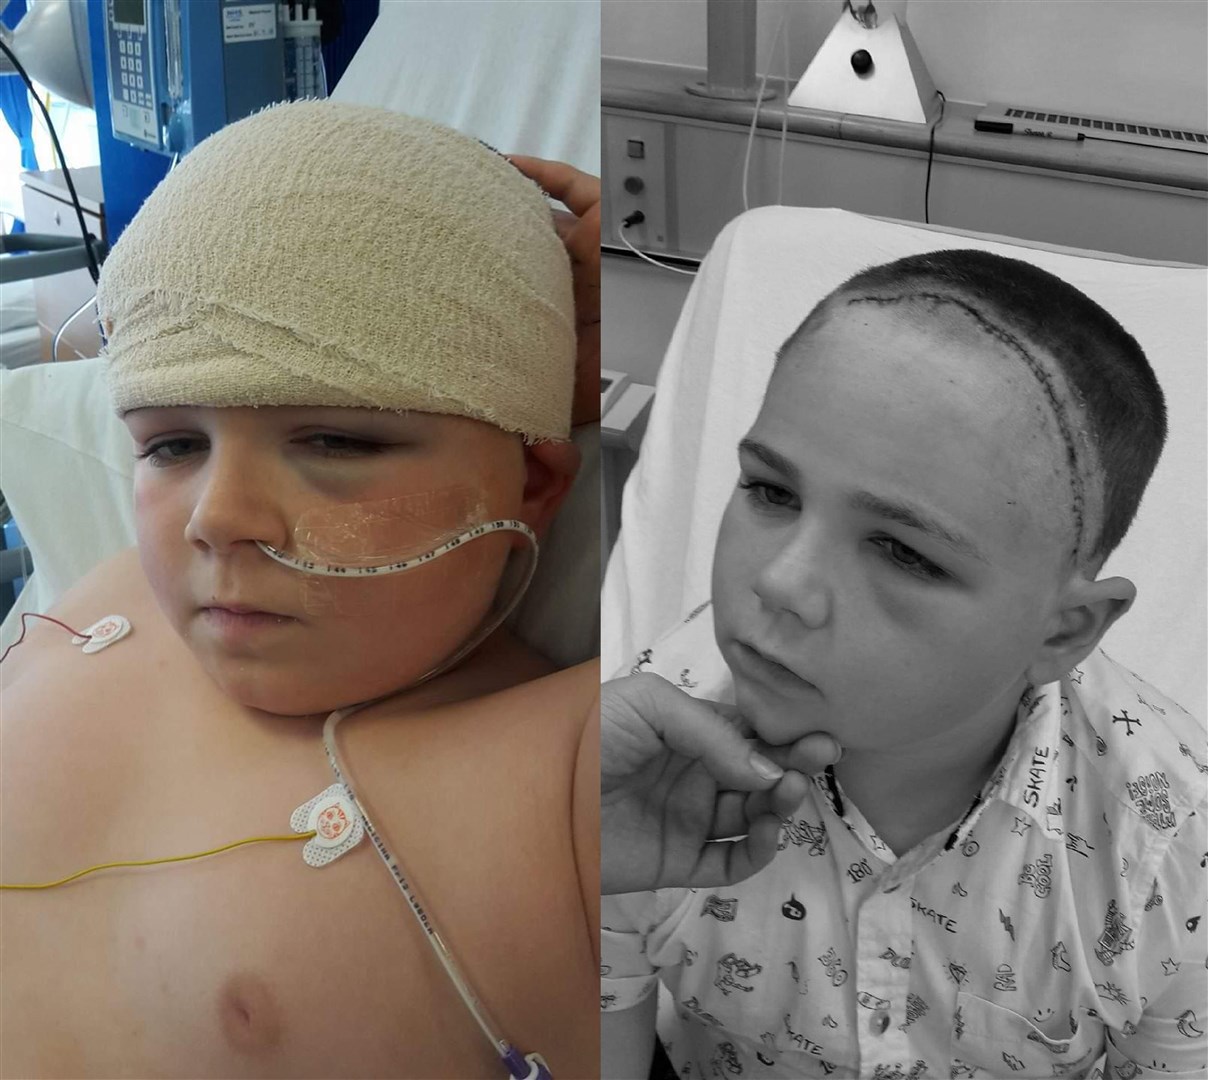 Lewis recovering following his surgery (left) and the scar after his bandages were removed.